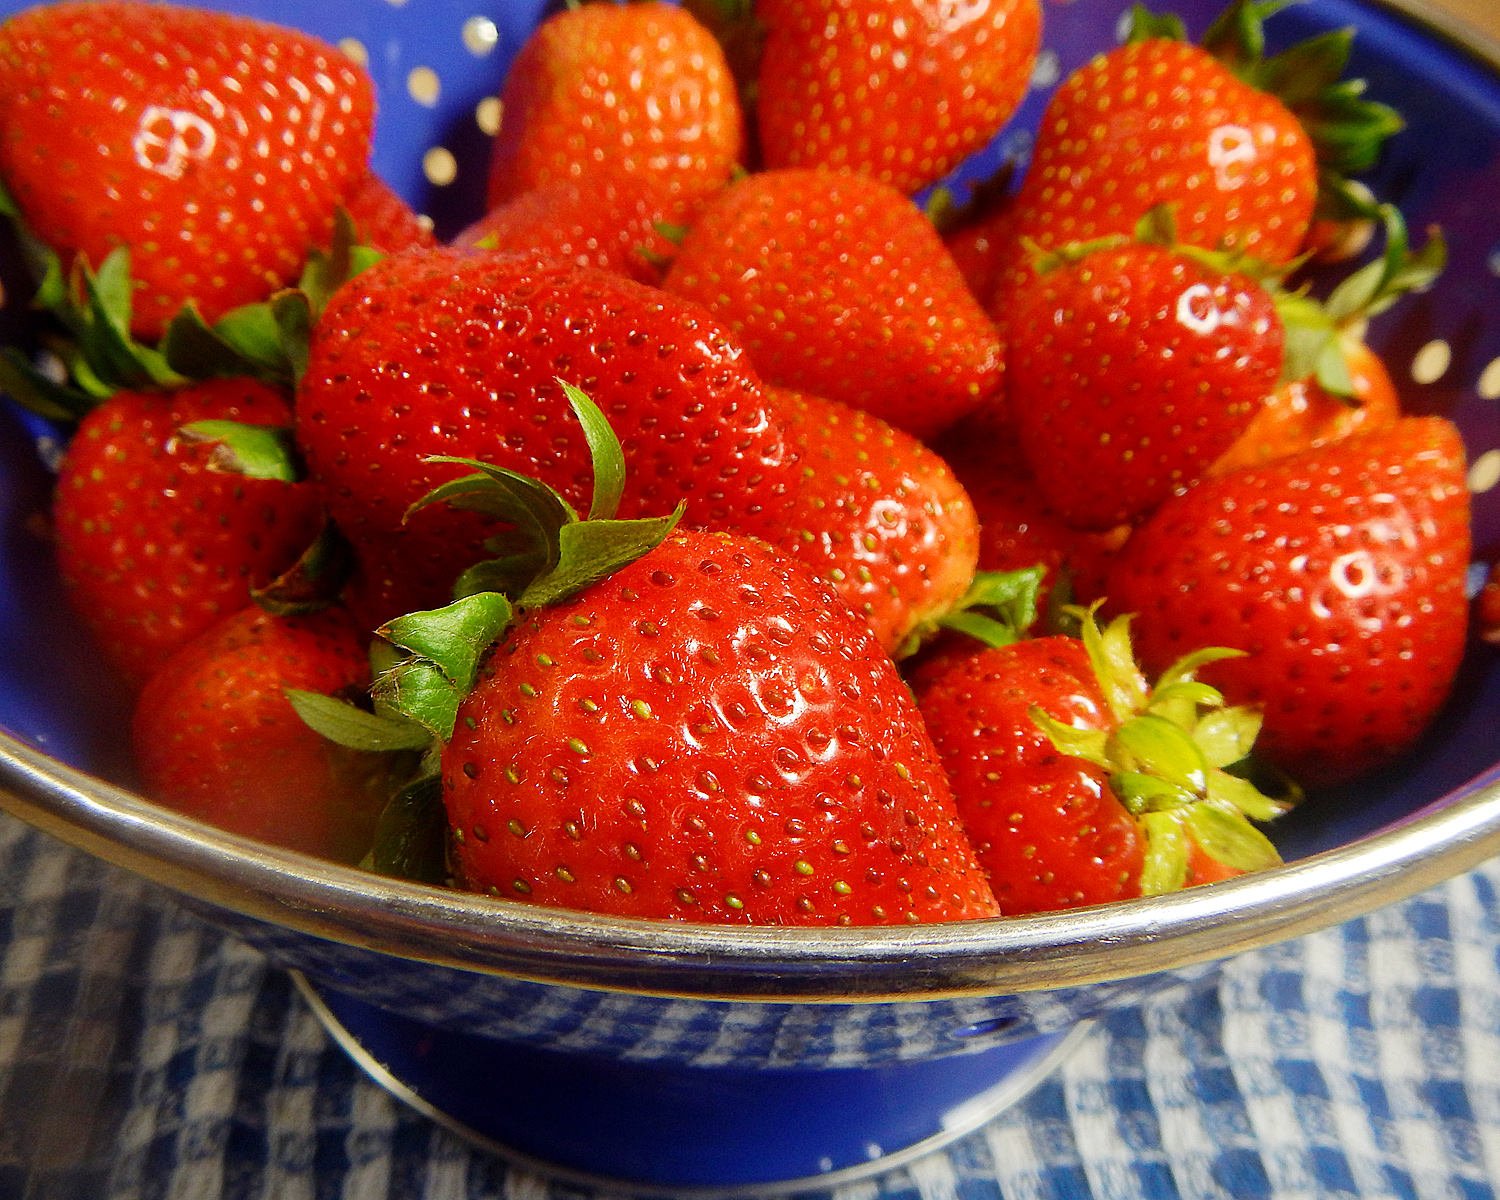 Strawberries in a Strainer